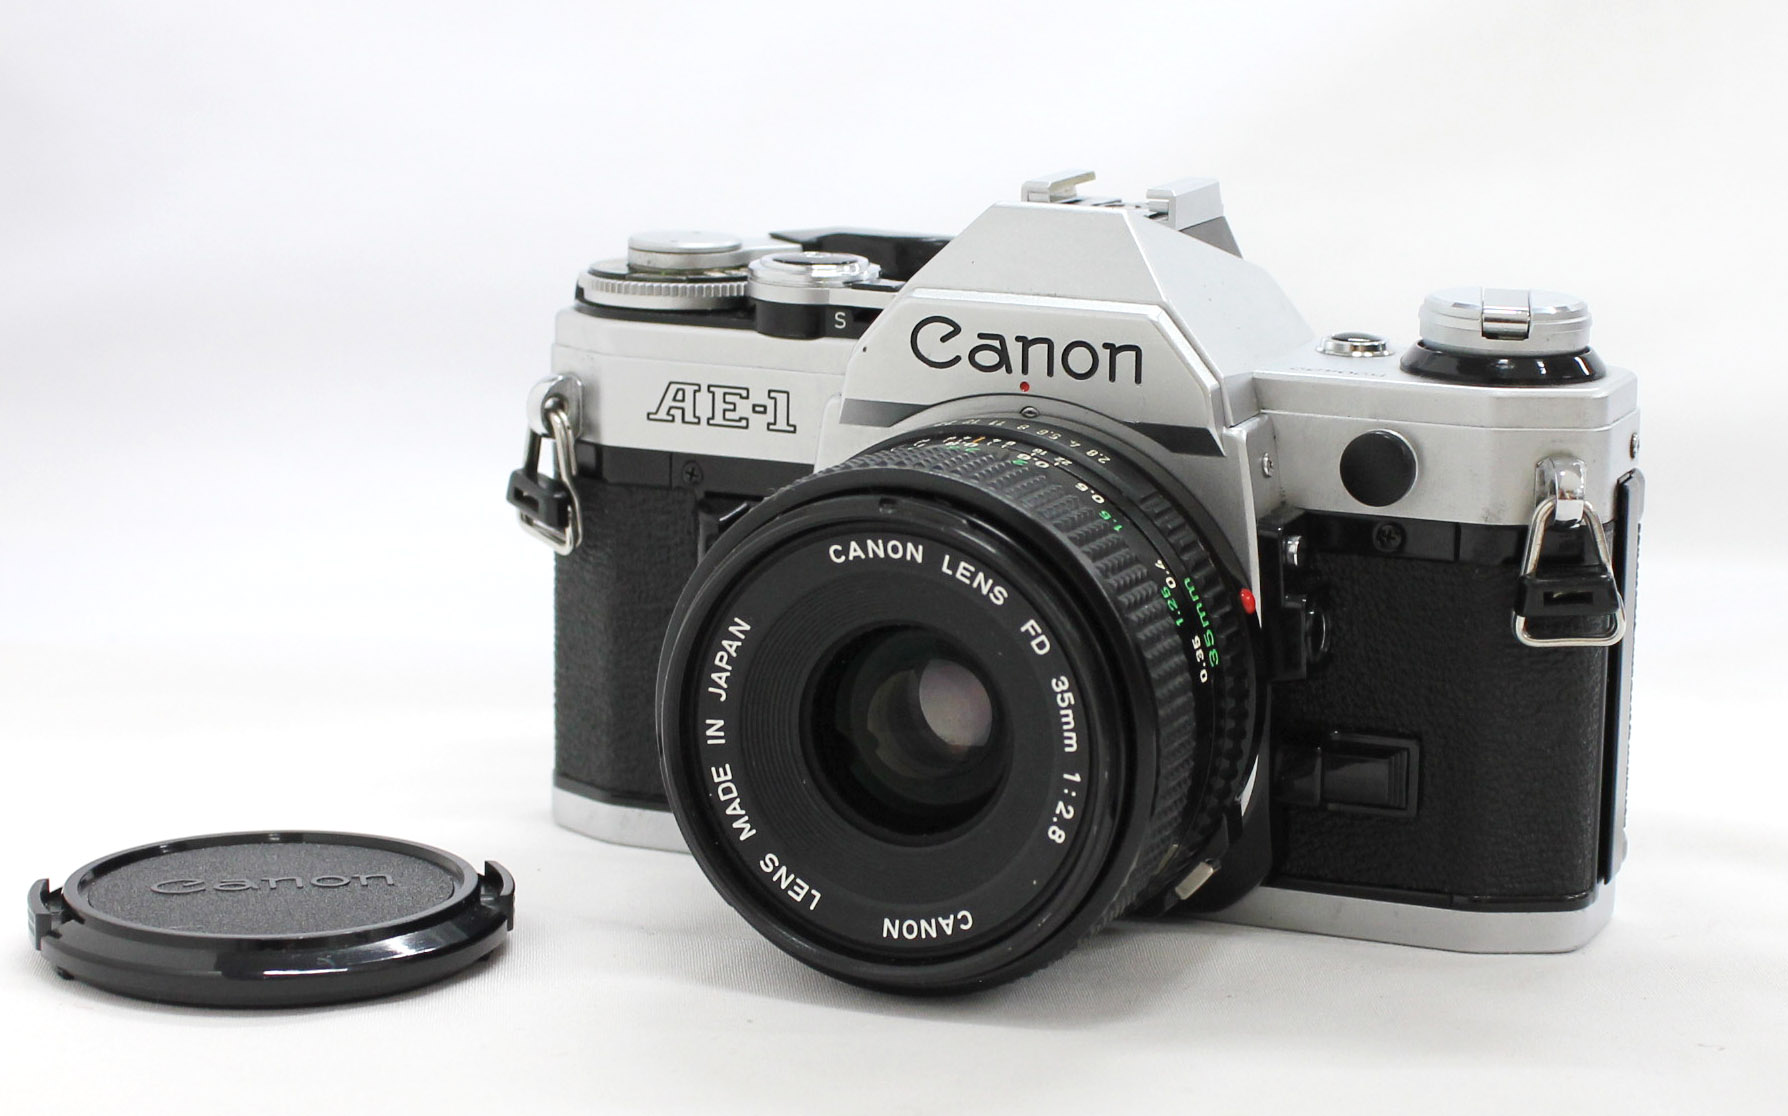 Japan Used Camera Shop | Canon AE-1 35mm SLR Film Camera with New FD 35mm F/2.8 Lens from Japan